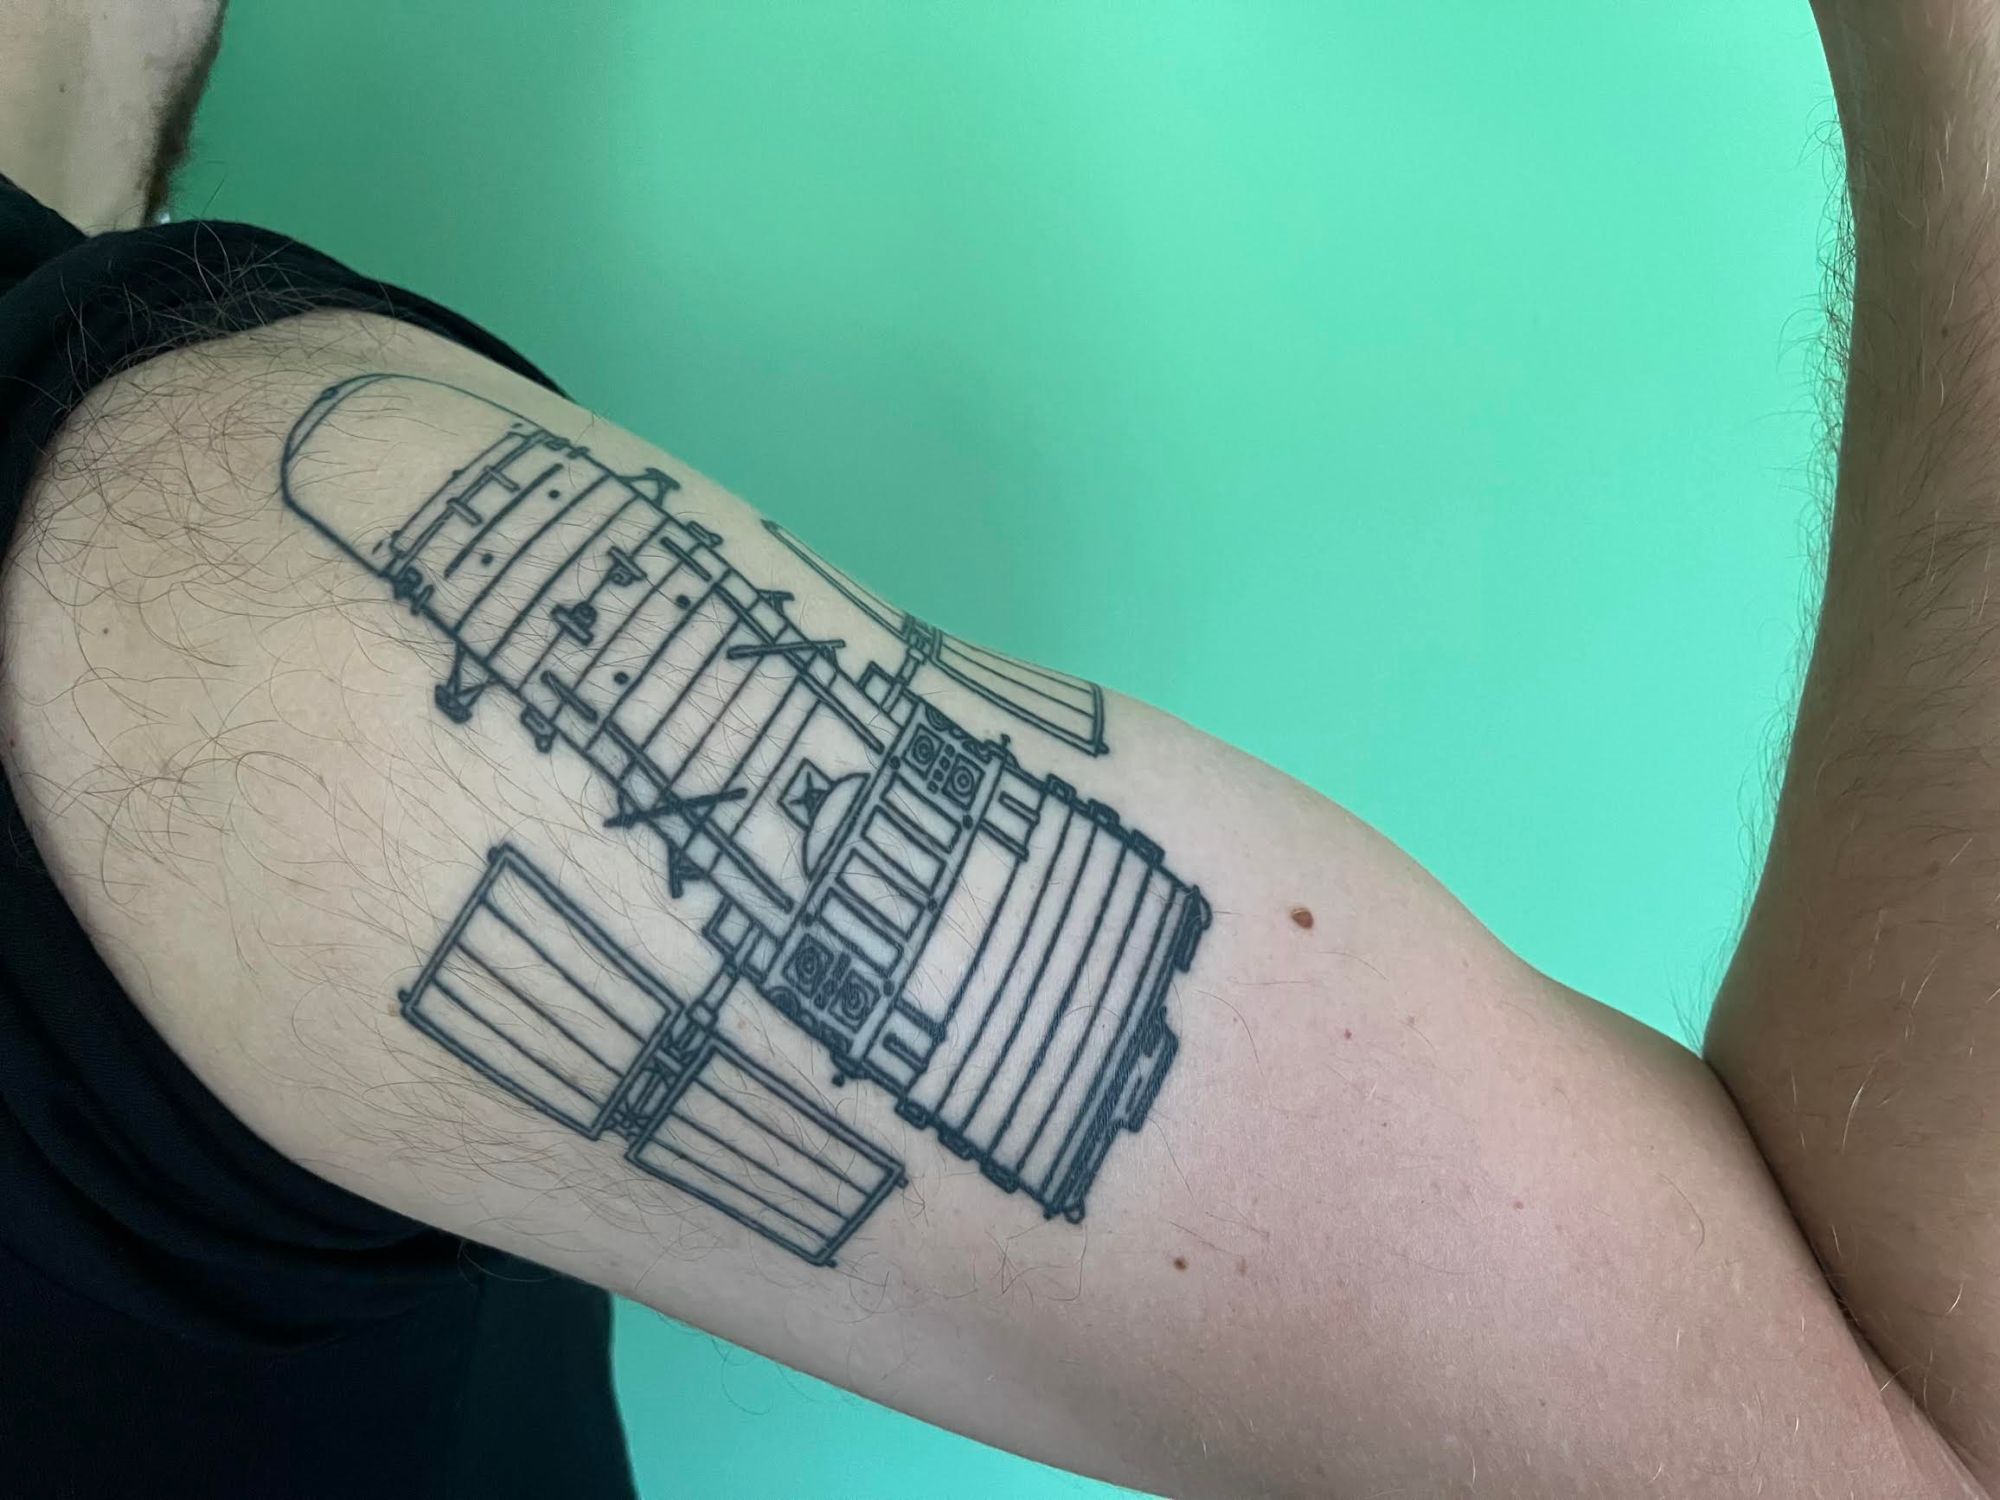 An arm tattooed with a blueprint-like image of the Hubble Space telescope.